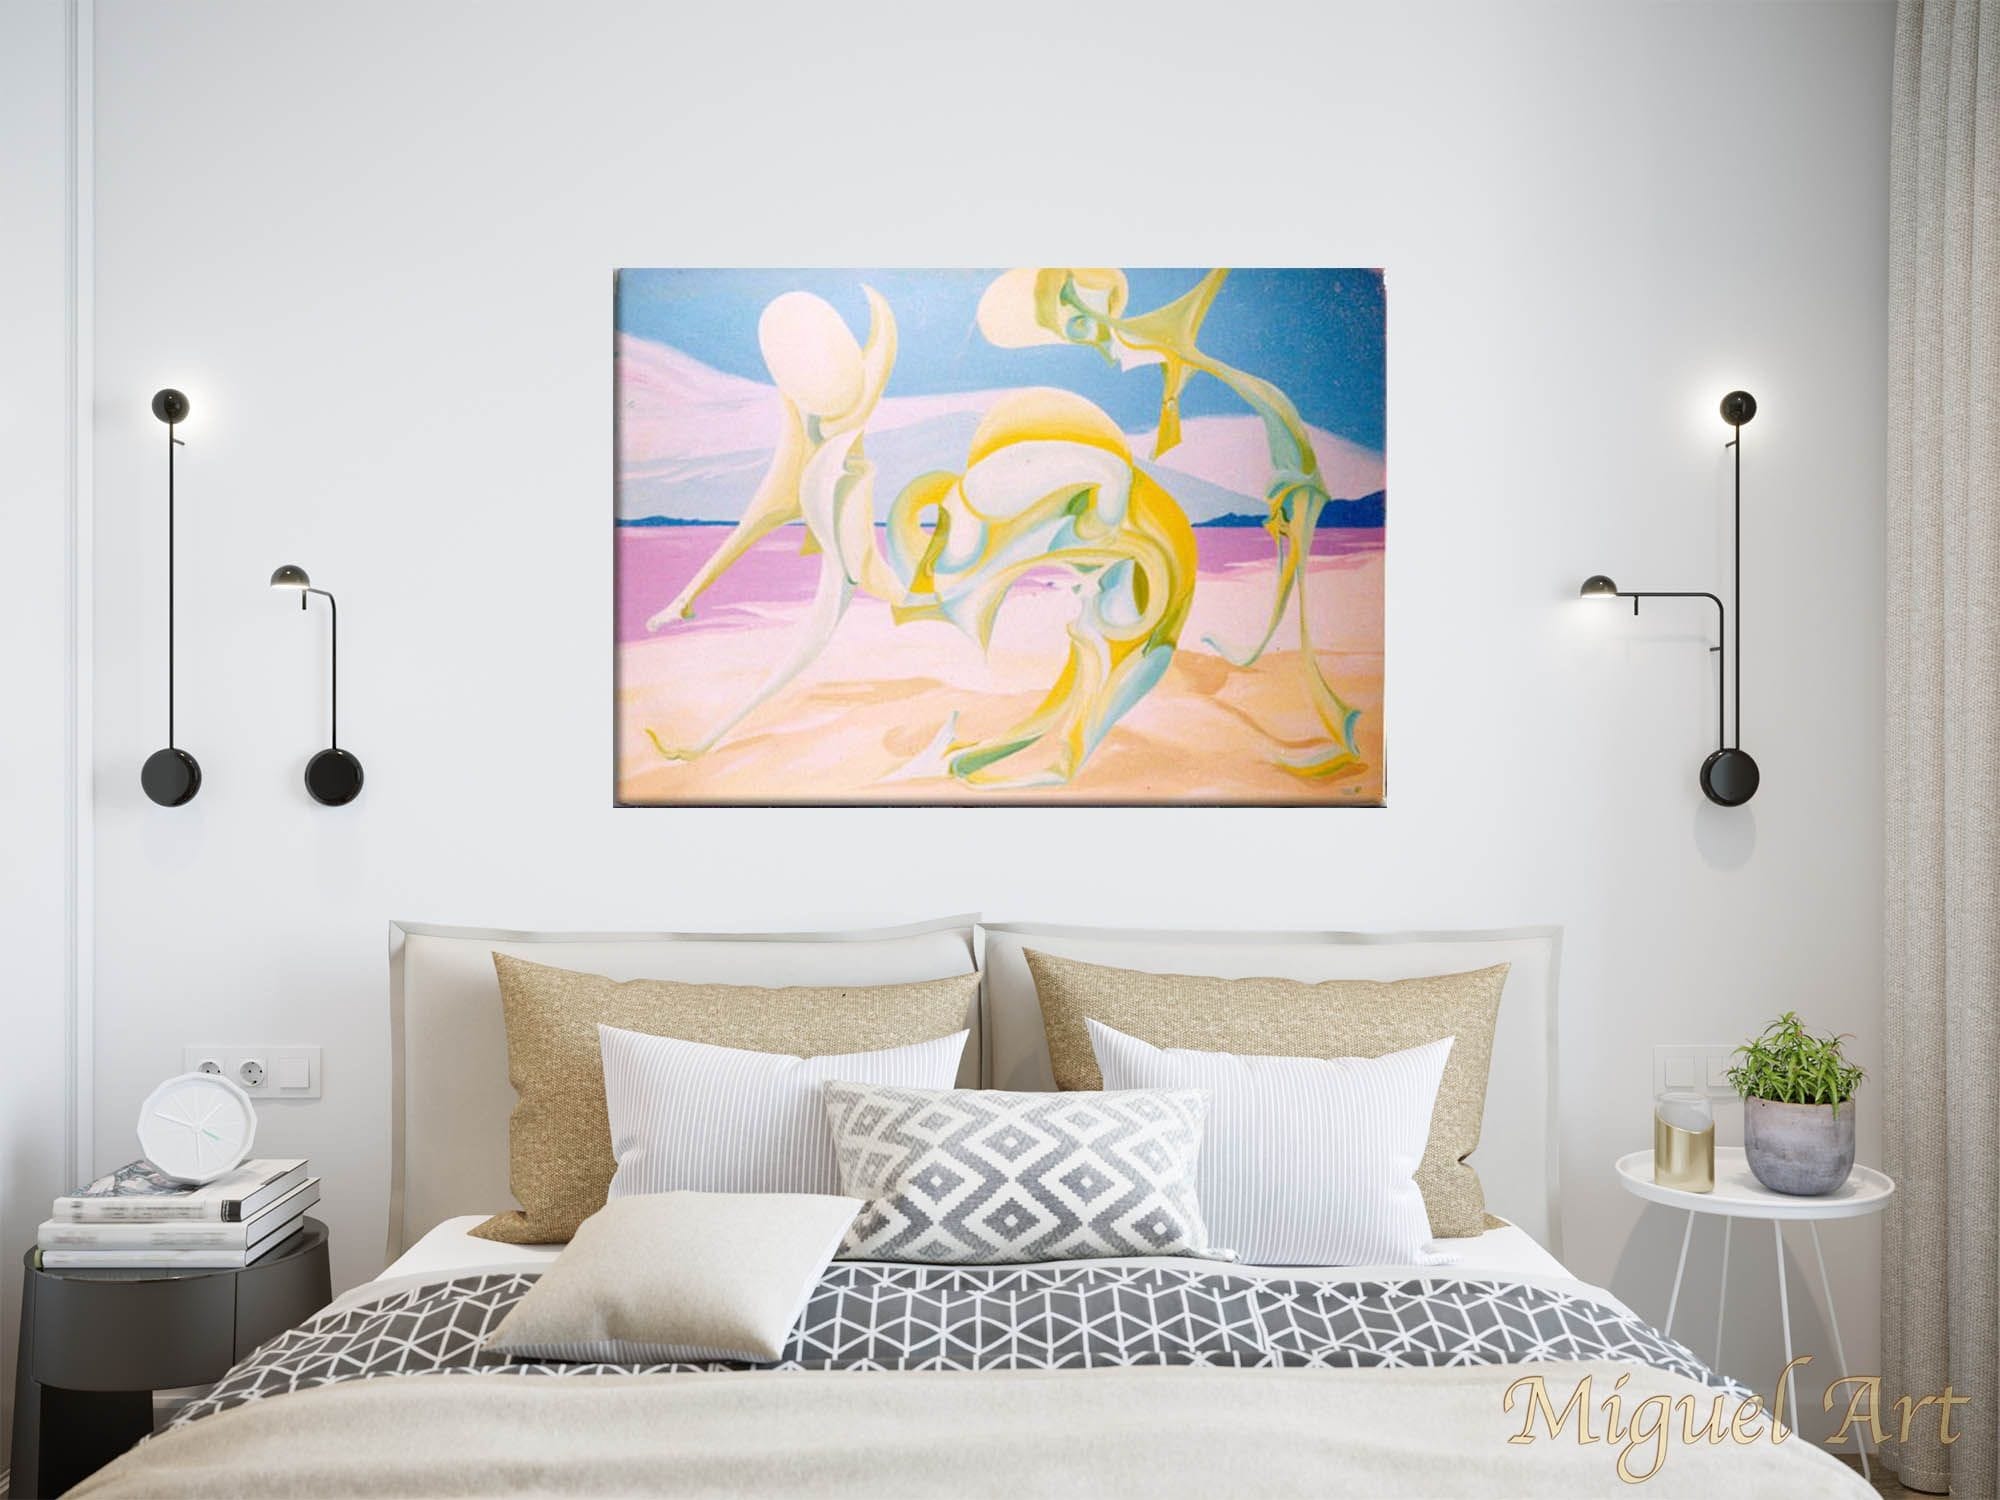 Painting of "Dança Ao Vento" displayed on a white wall in a bedroom